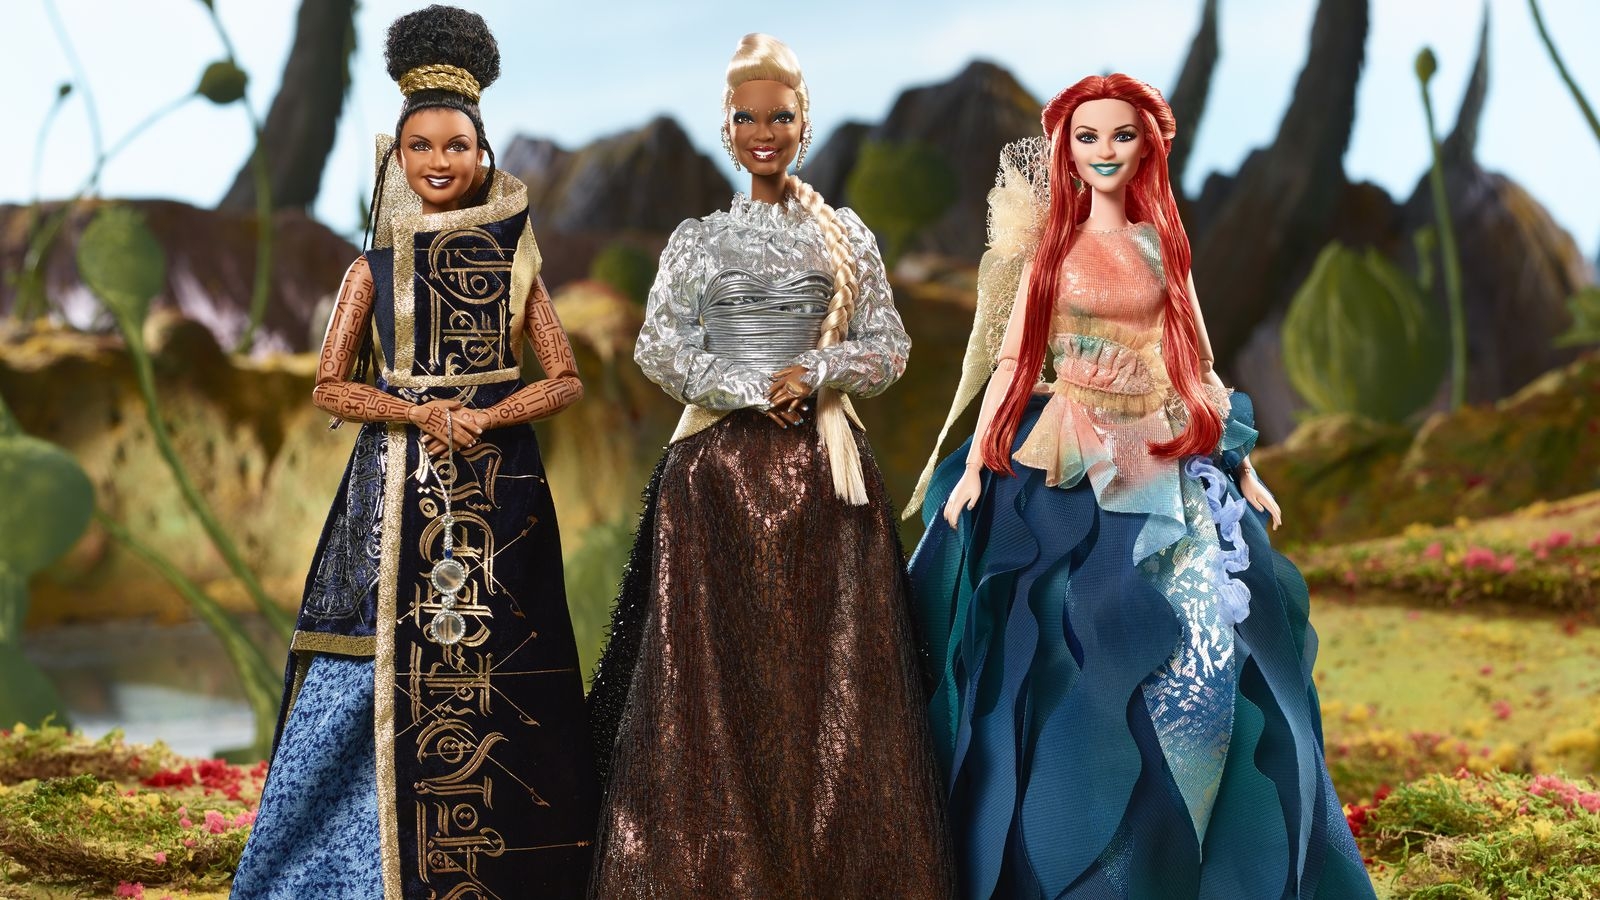 The women of ‘A Wrinkle in Time’ — including, yes, Oprah — get their own Barbie dolls